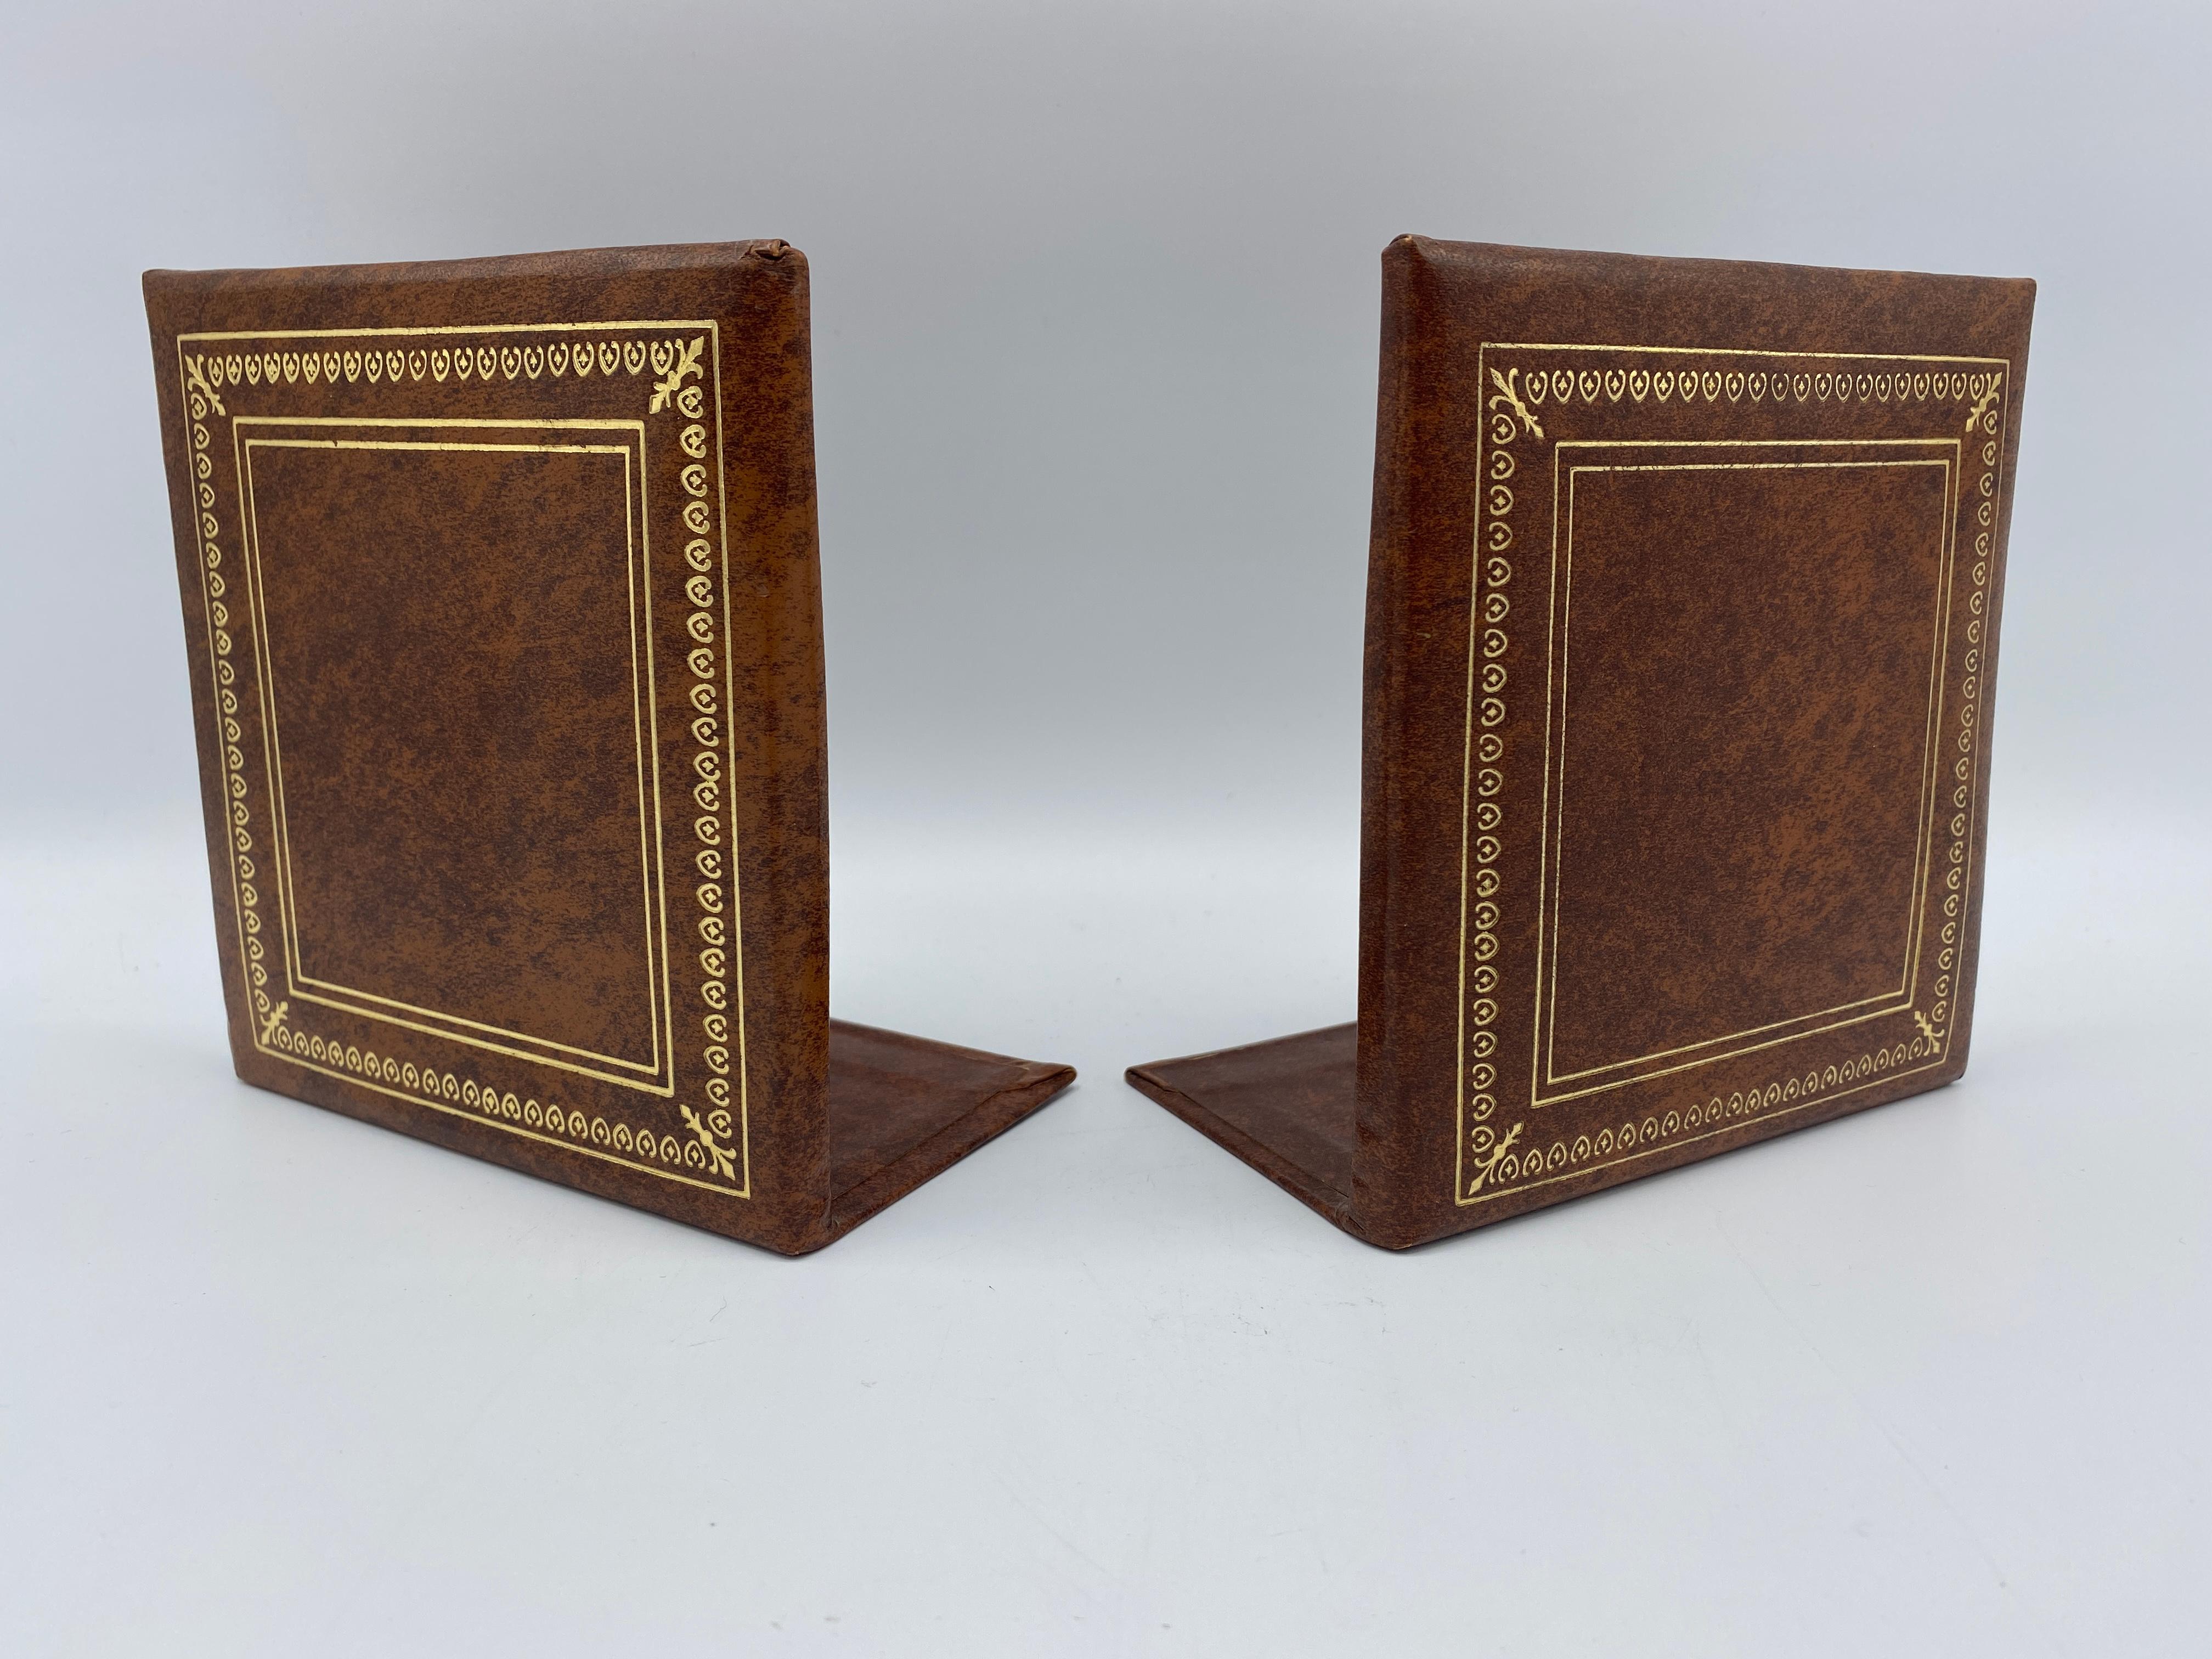 American Classical Italian Leather Bookends with Gold Debossed Border, Pair, 1960s For Sale